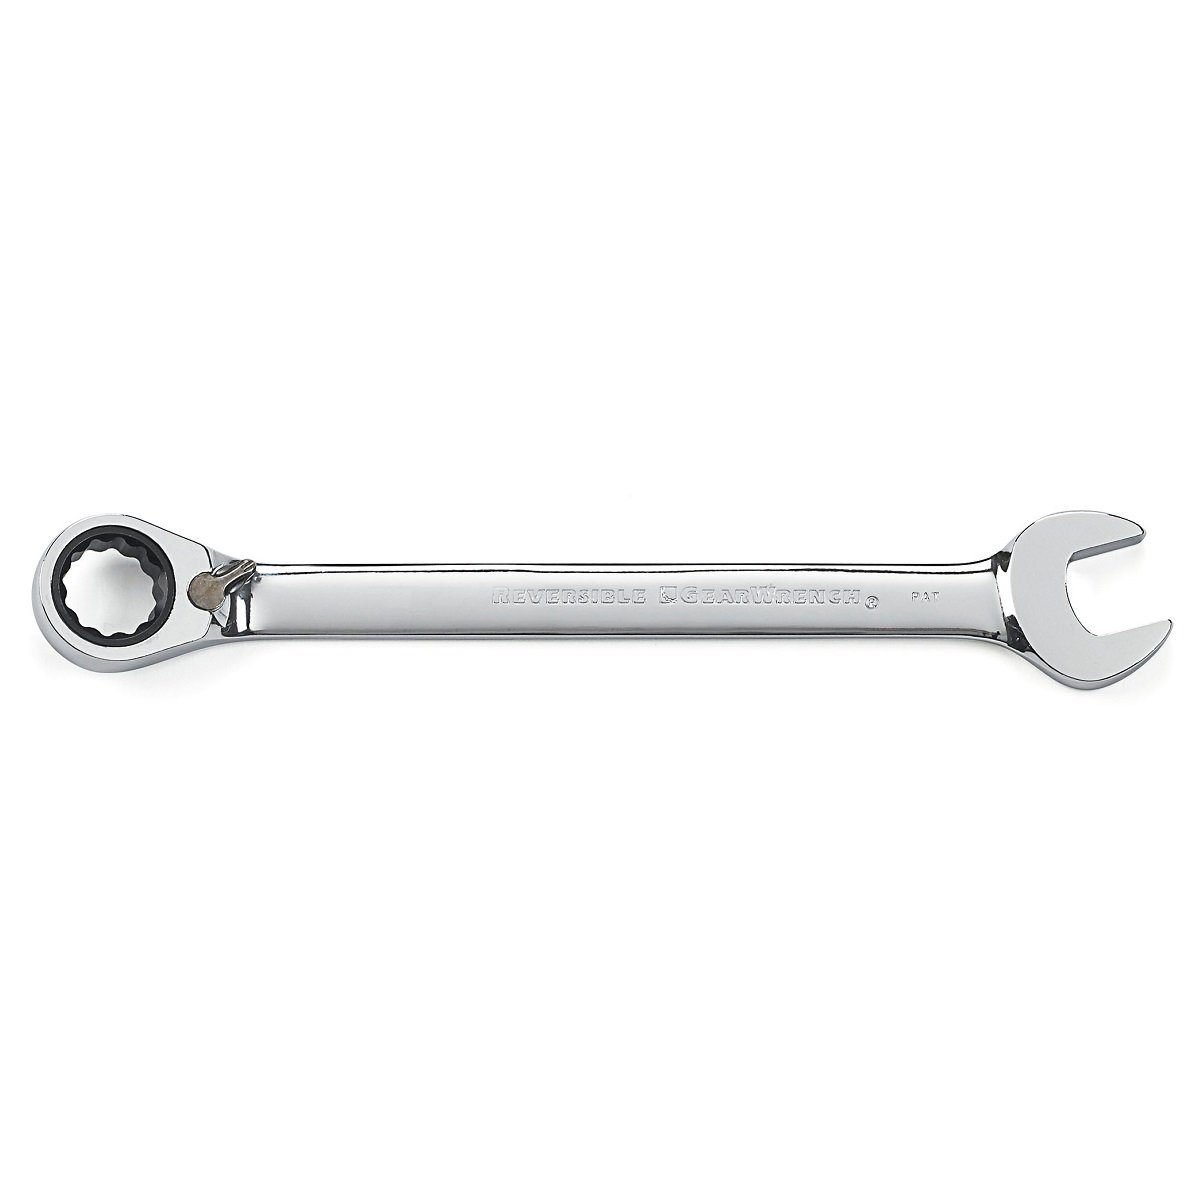 GearWrench 11mm Reversible Combination Ratcheting Wrench Spanner 9611N